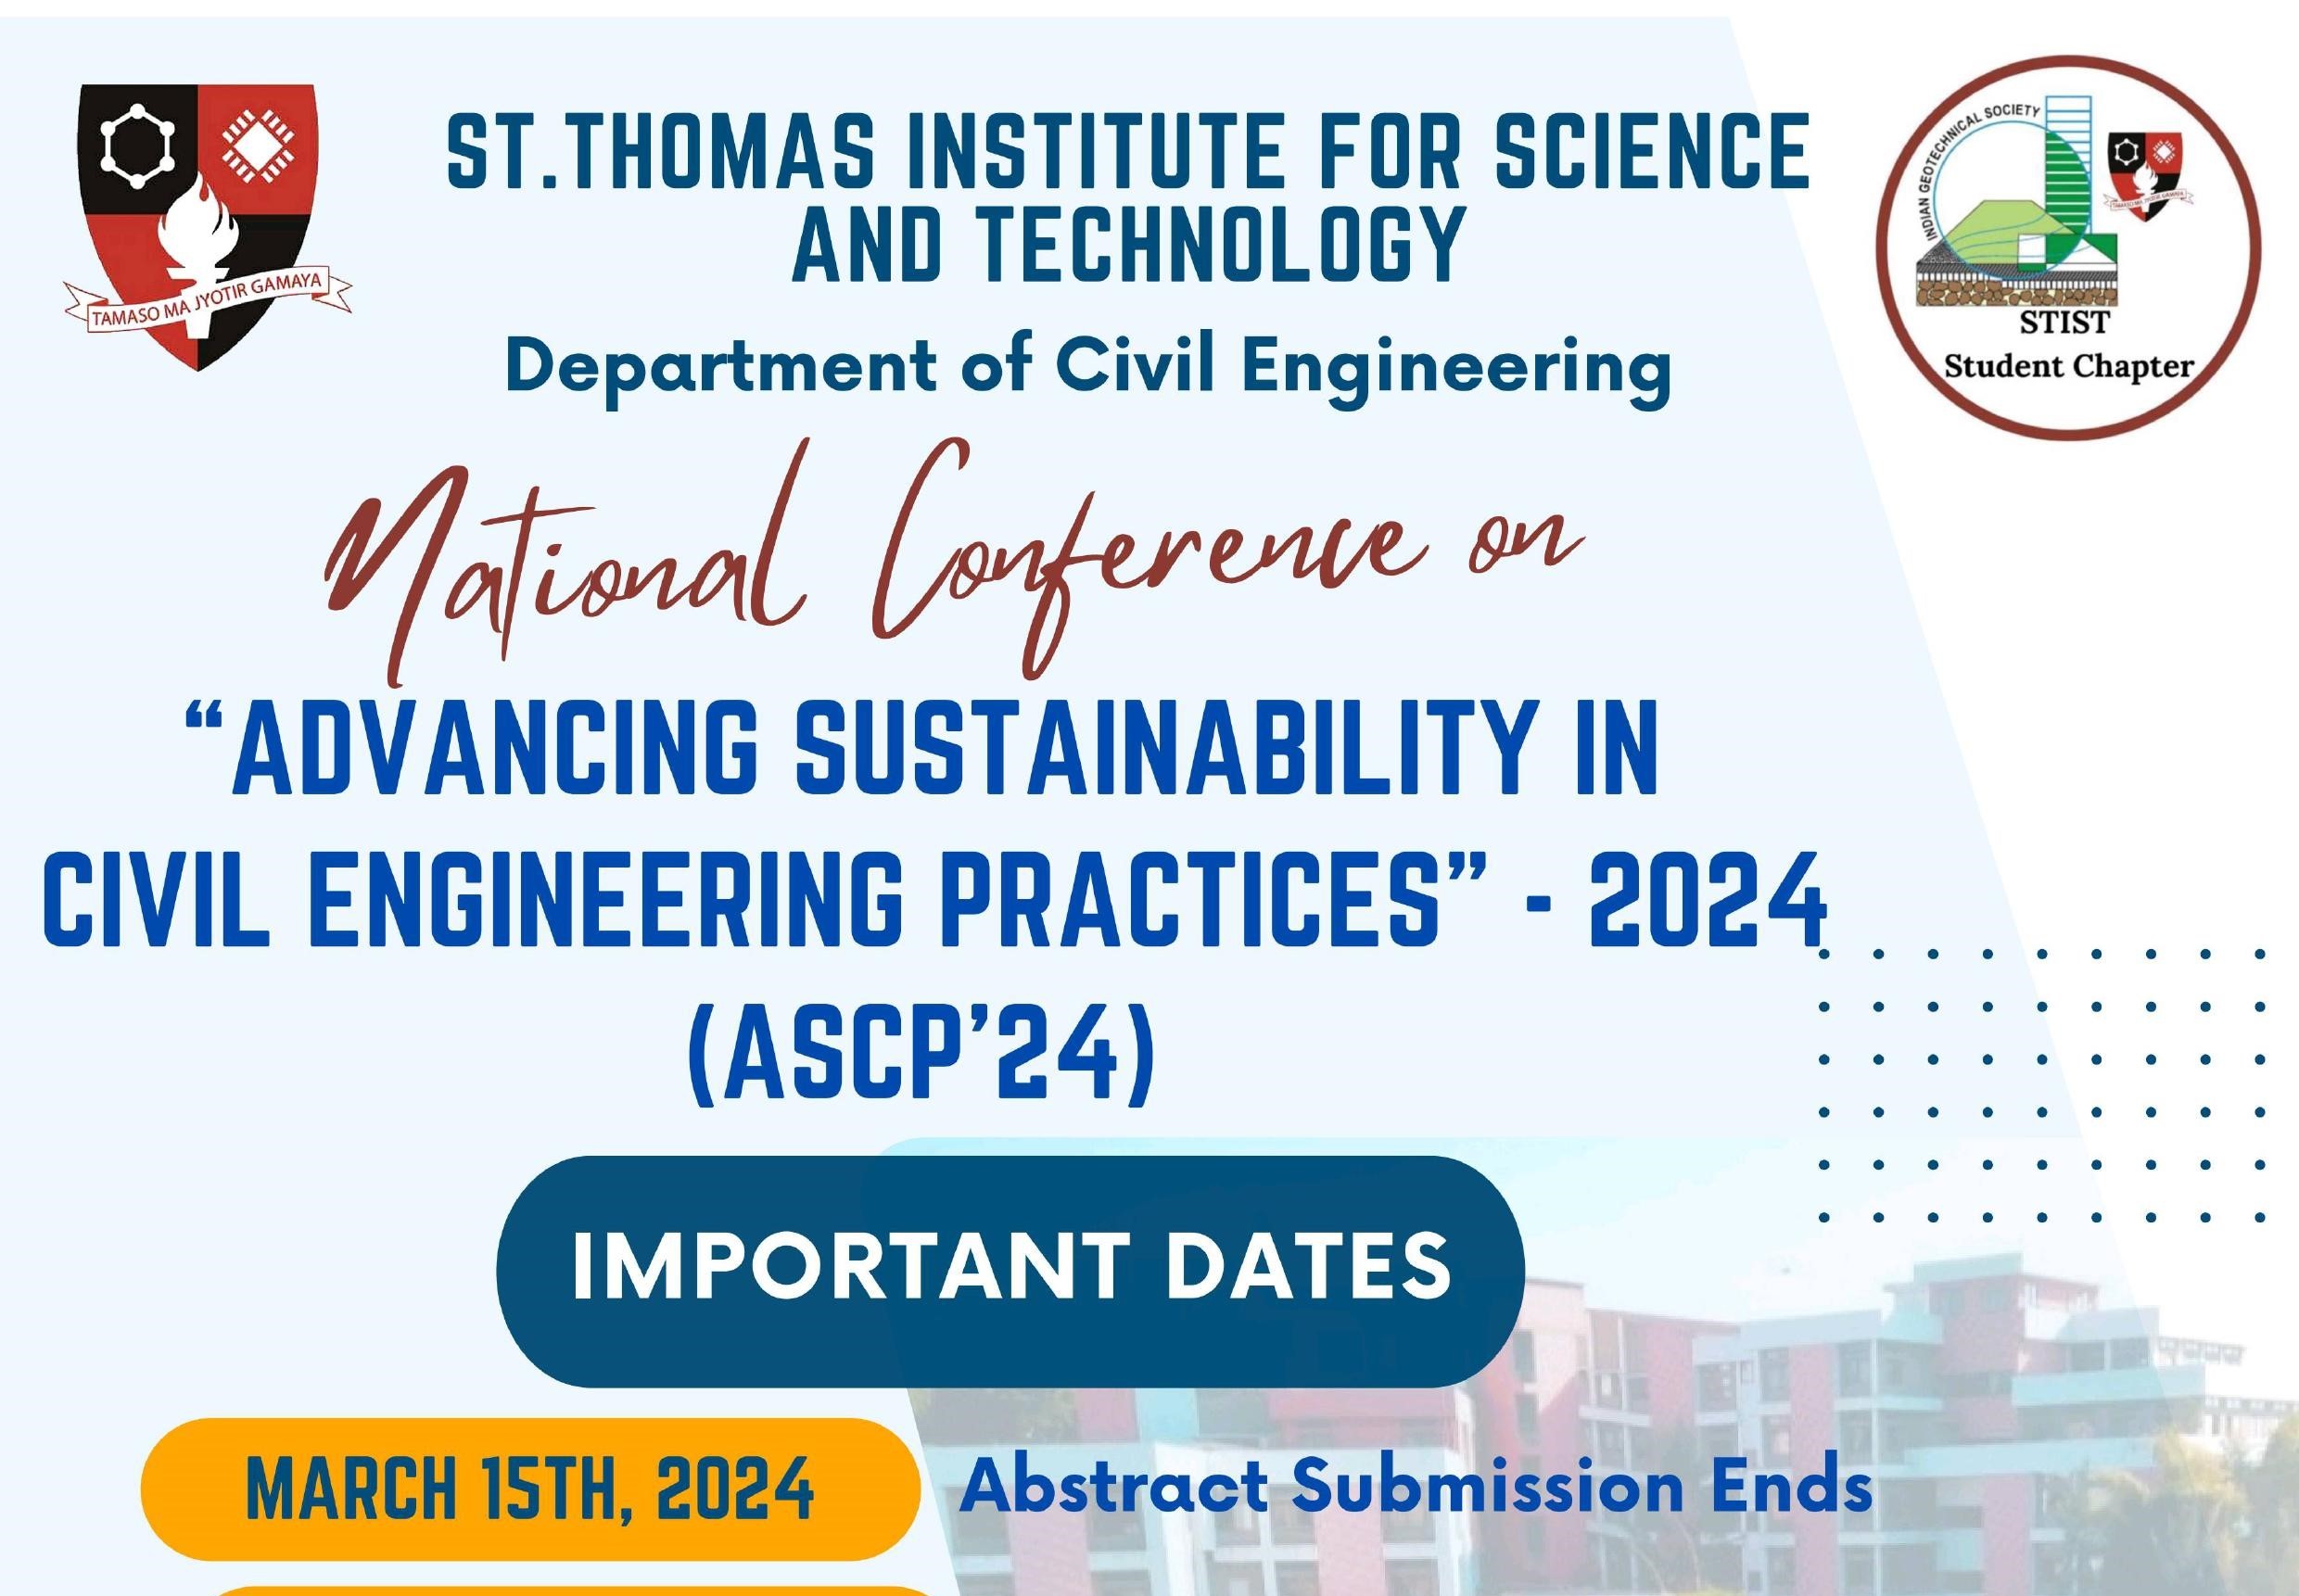 National Conference on Advancing Sustainability in Civil Engineering Practices - 2024 (ASCP'24)